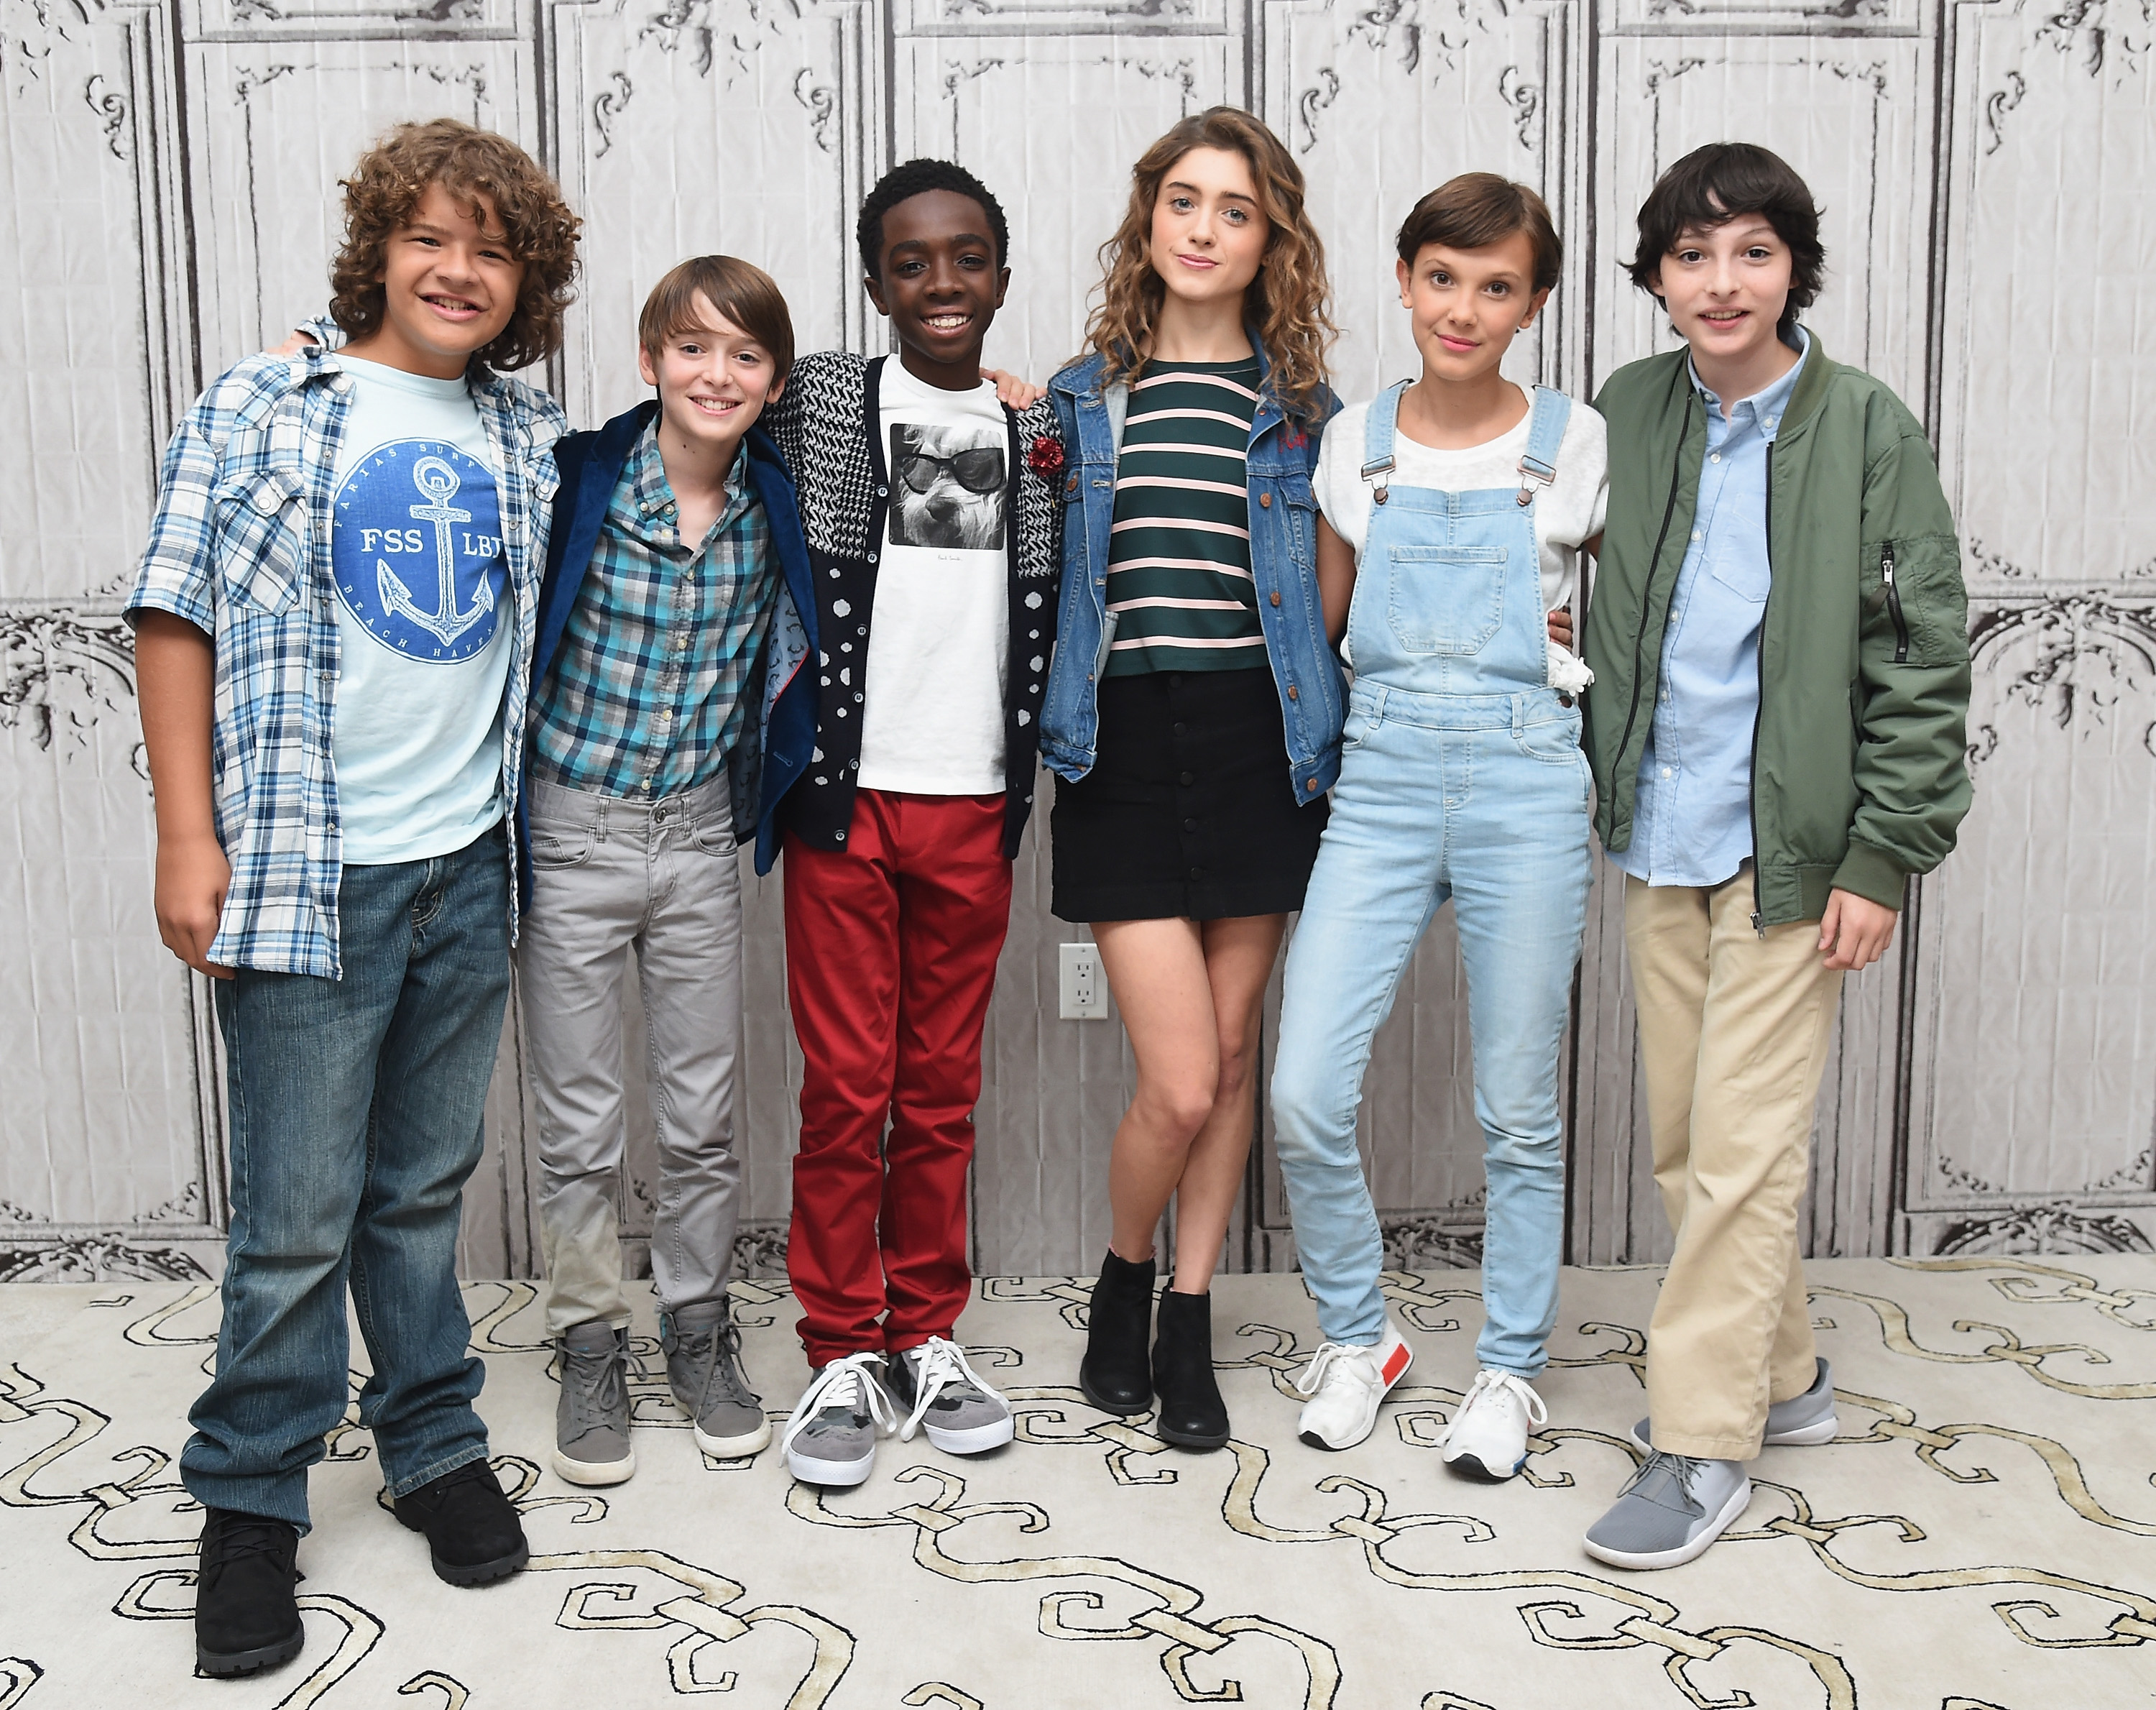 Where To See More Of The 'Stranger Things' Cast.